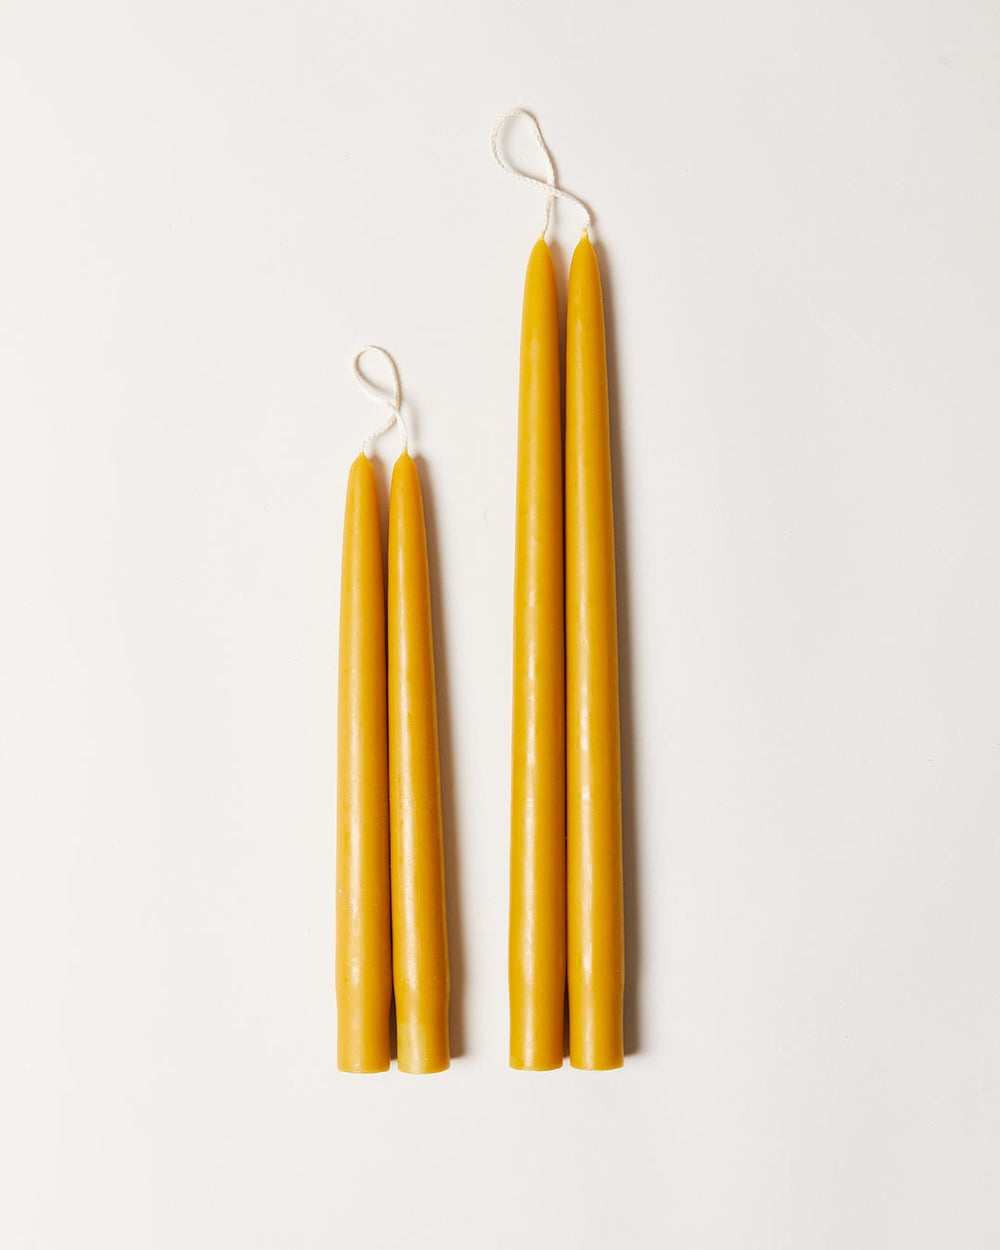 Taper Candles - Greens + Golds